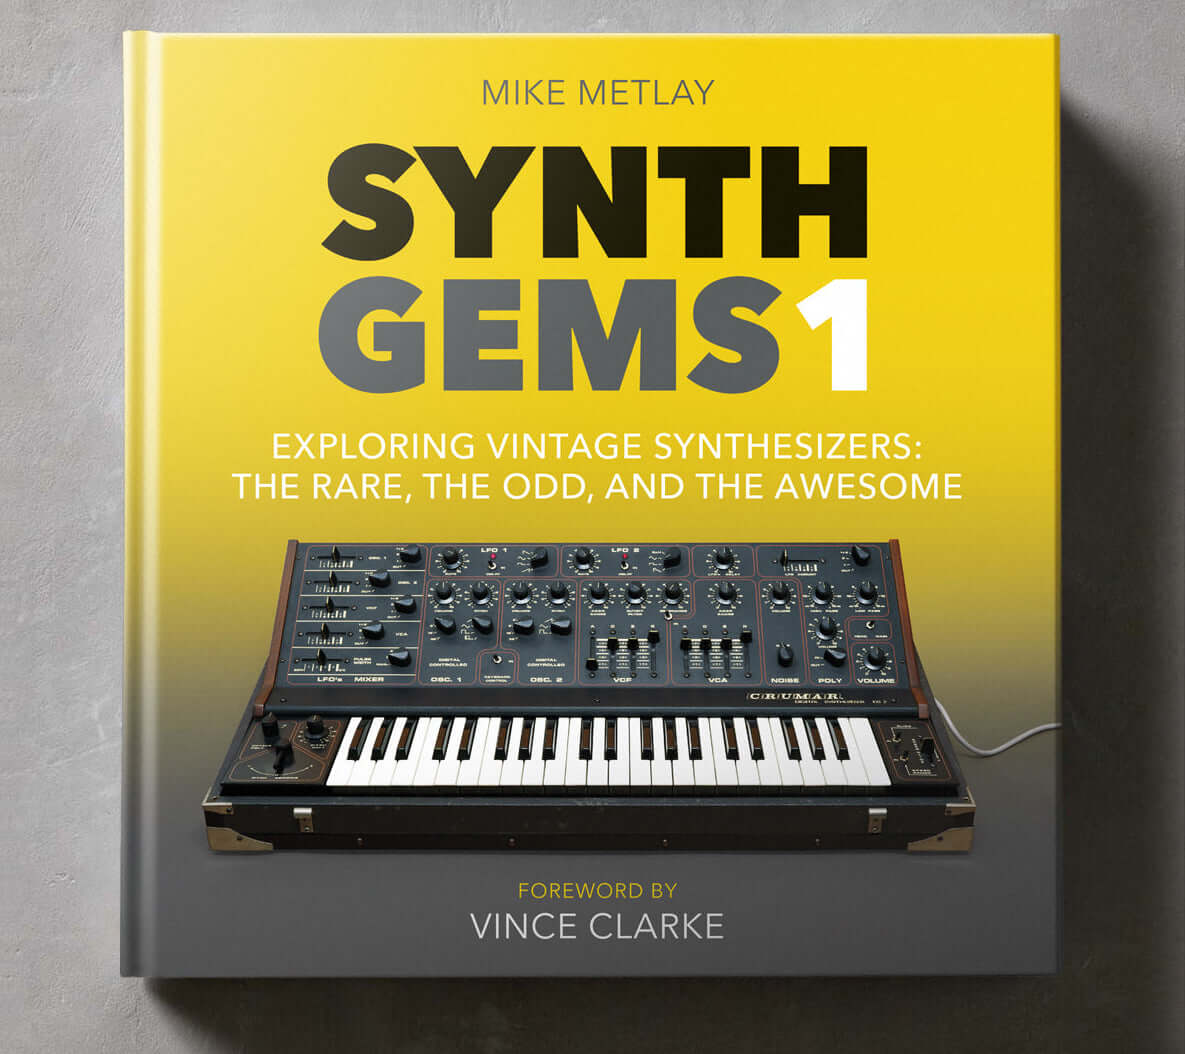 BOOK REVIEW: Synth Gems 1 – Exploring Vintage Synthesizers